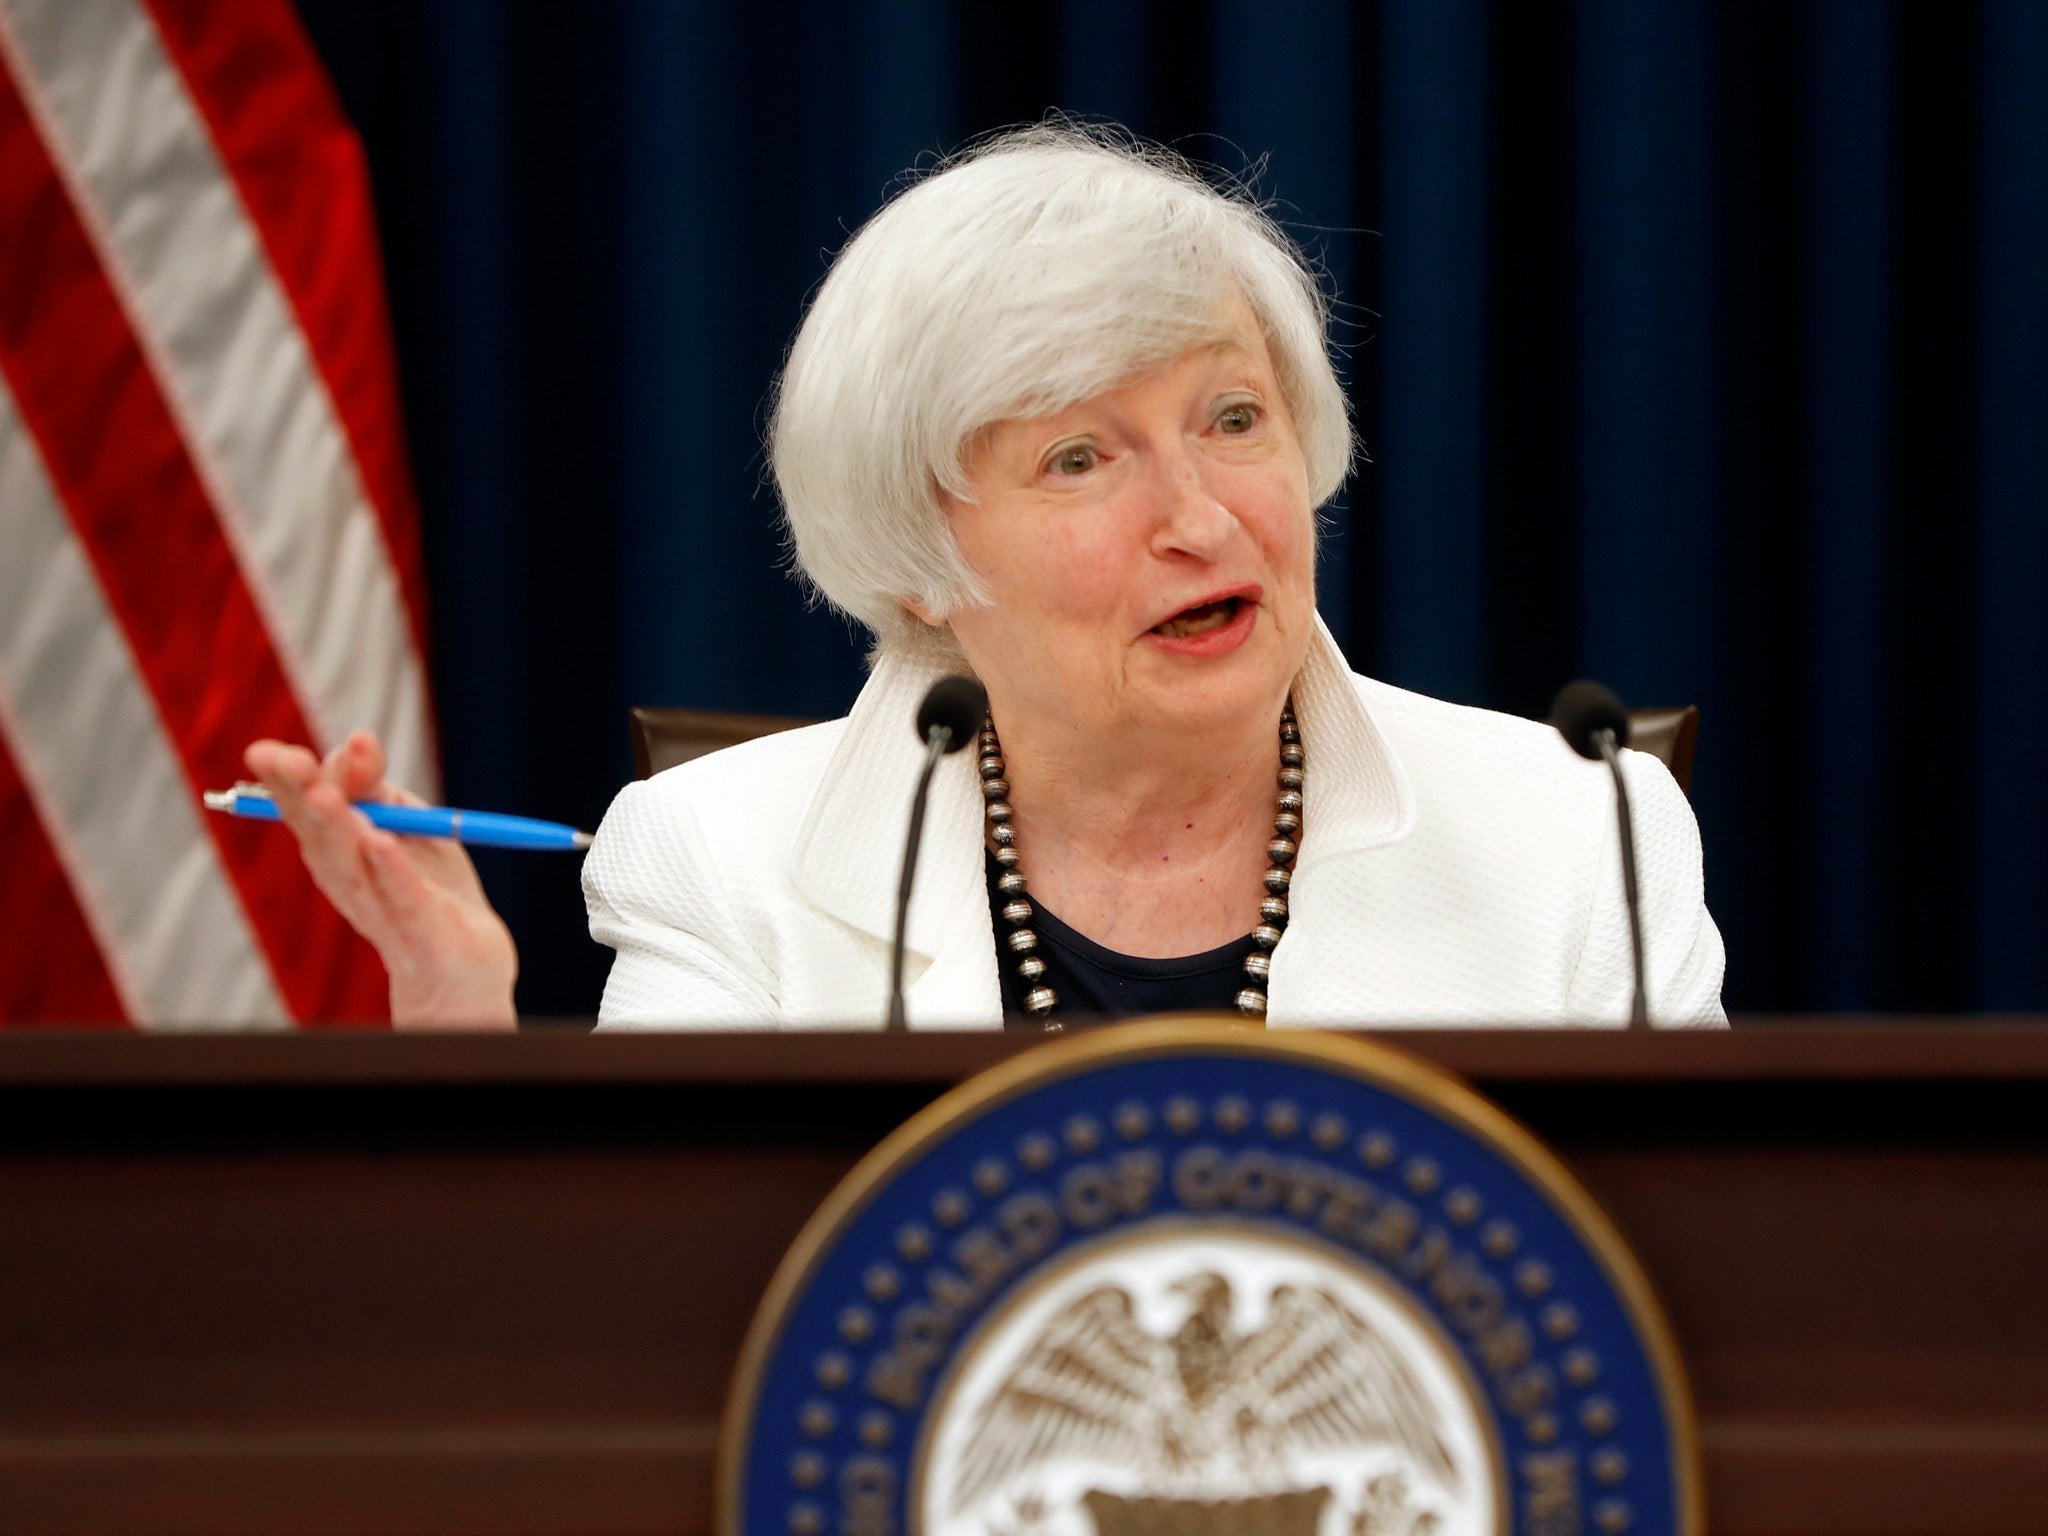 Federal Reserve Chair Janet Yellen speaks following the Federal Open Market Committee meeting in Washington DC